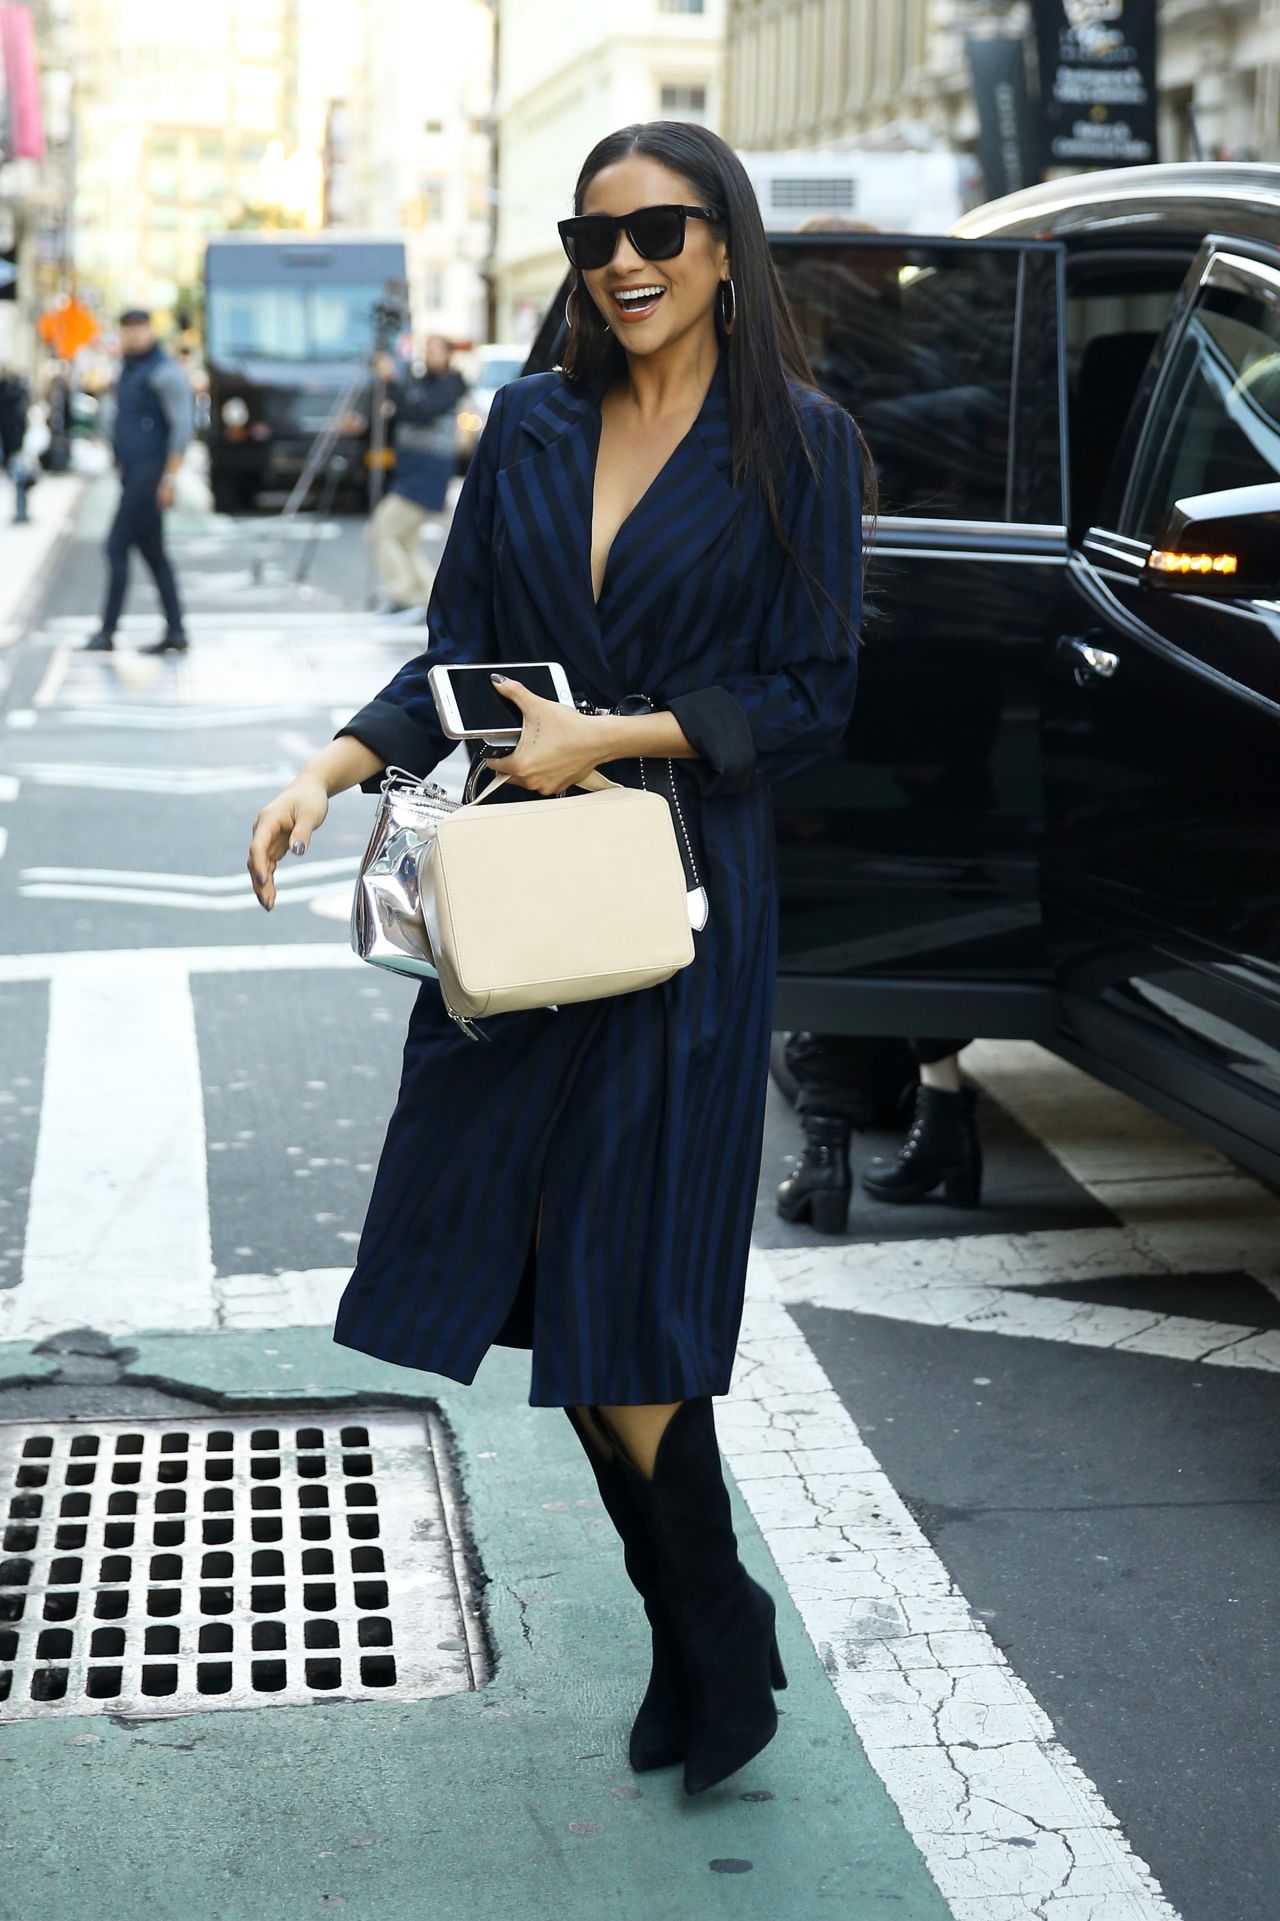 shay-mitchell-at-revolve-pop-up-store-in-new-york-city-10-25-2018-2.jpg